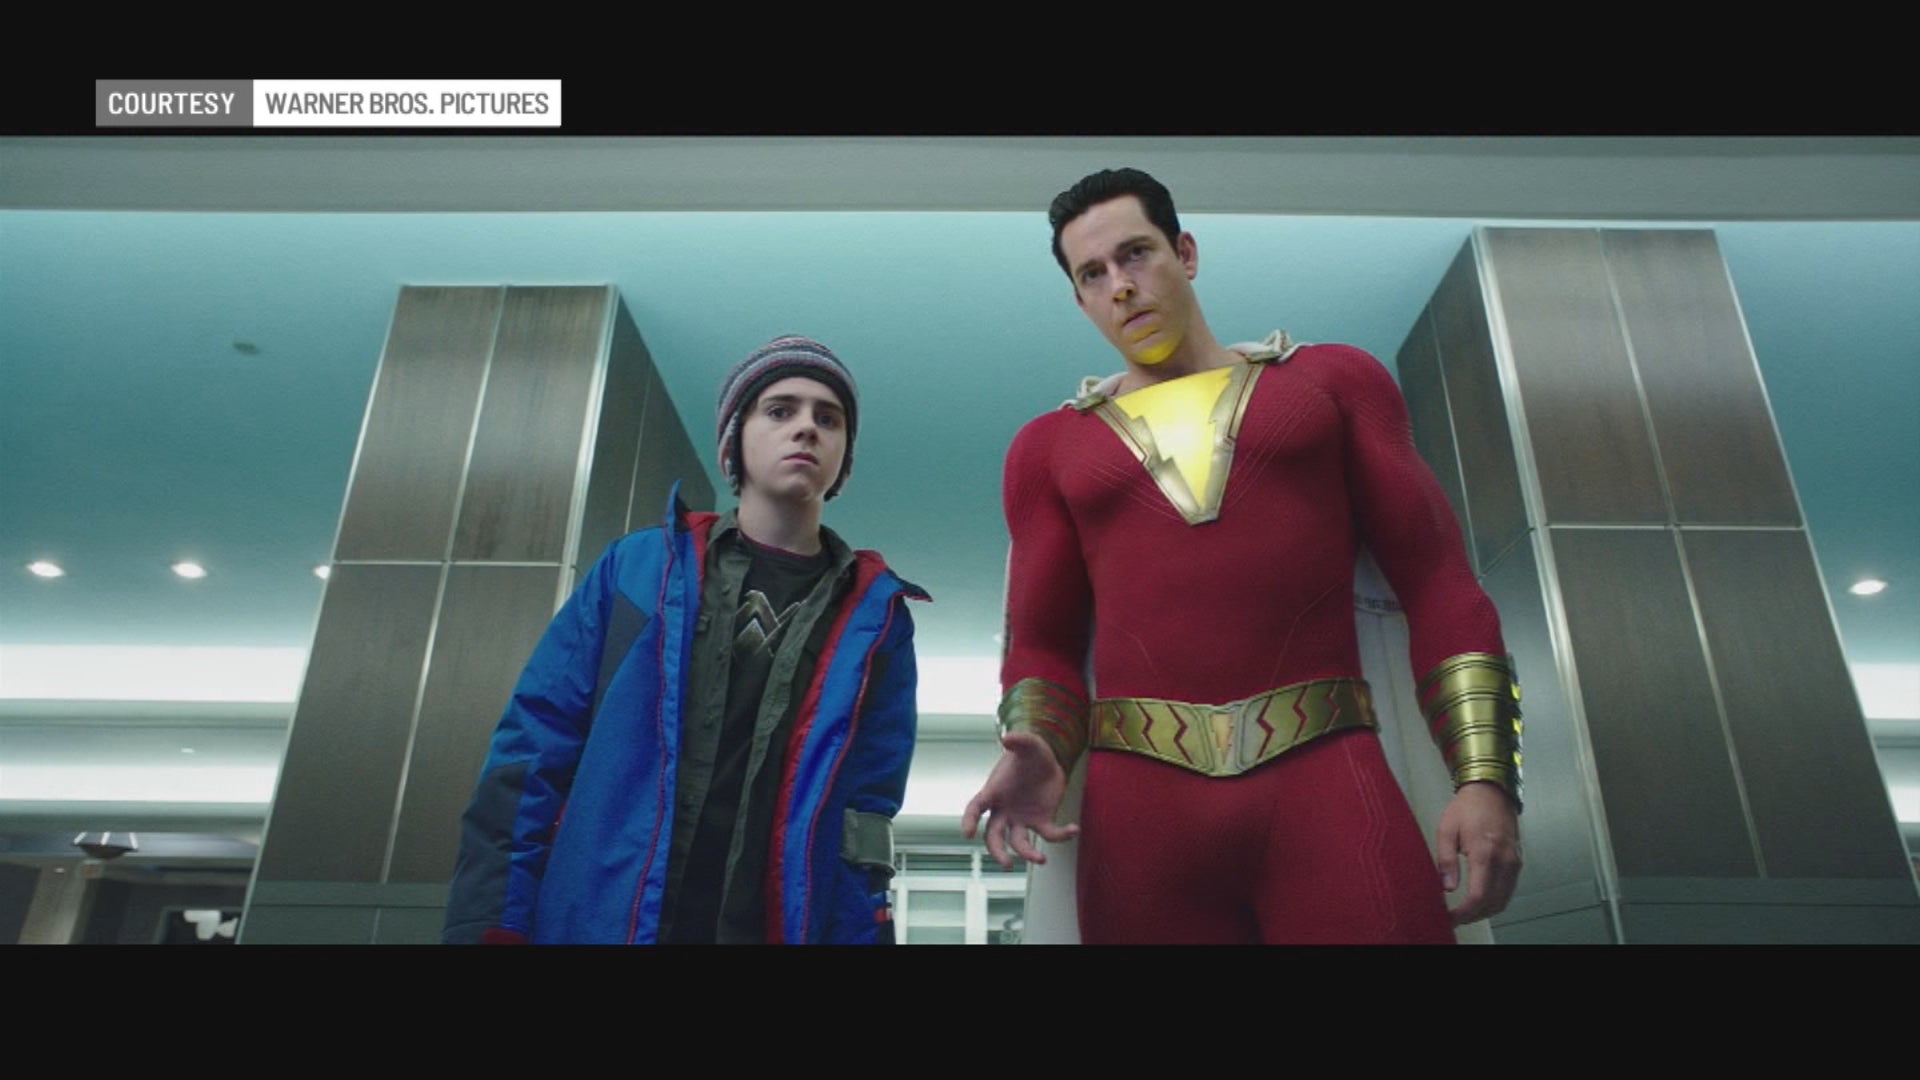 Shazam!” comes to theaters